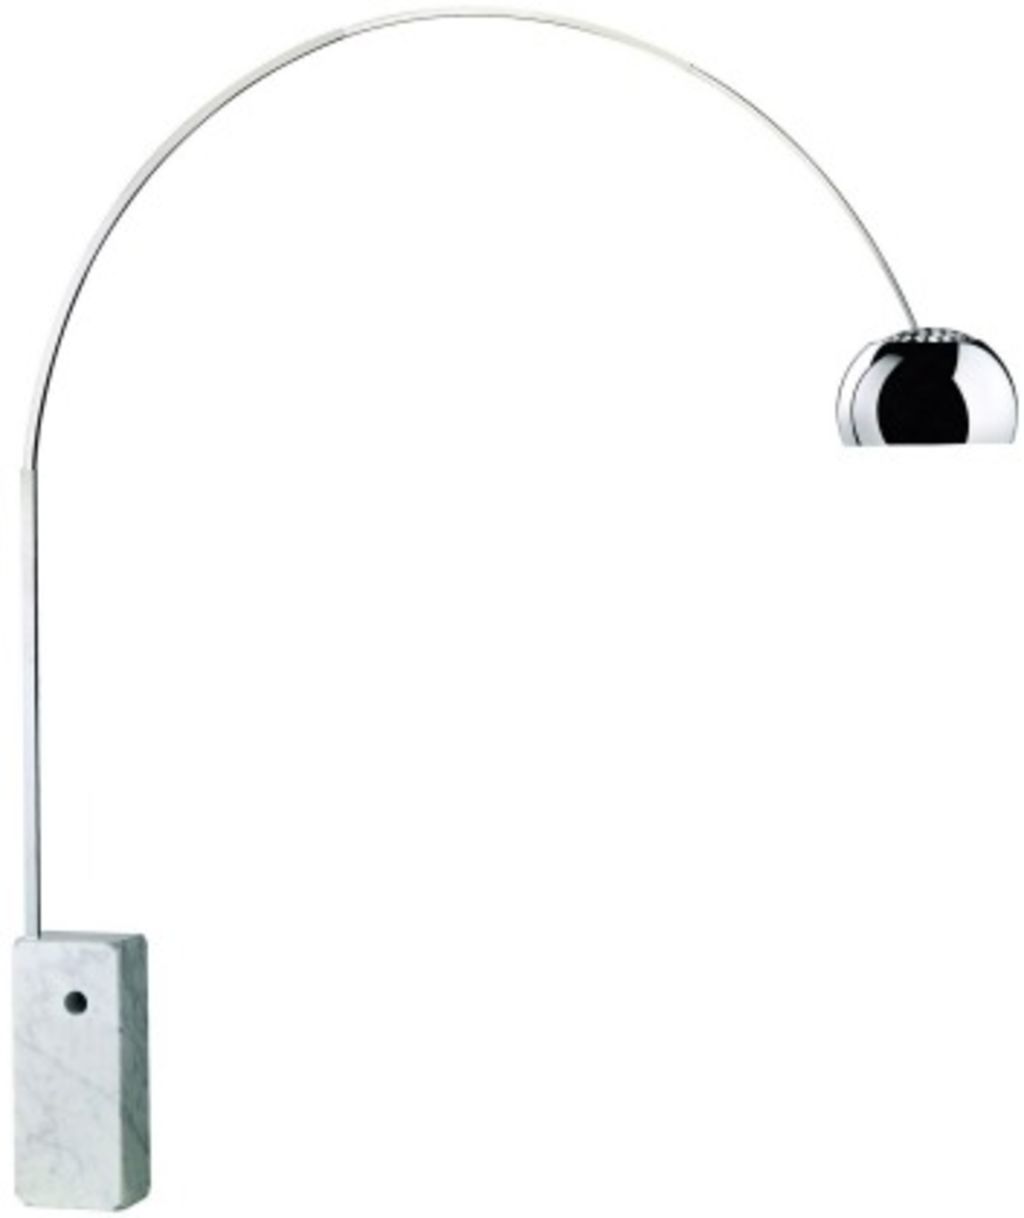 The classic Arco floor lamp designed by Achille and Pier Giacomo Castiglioni in 1962. Photo: supplied by Euroluce